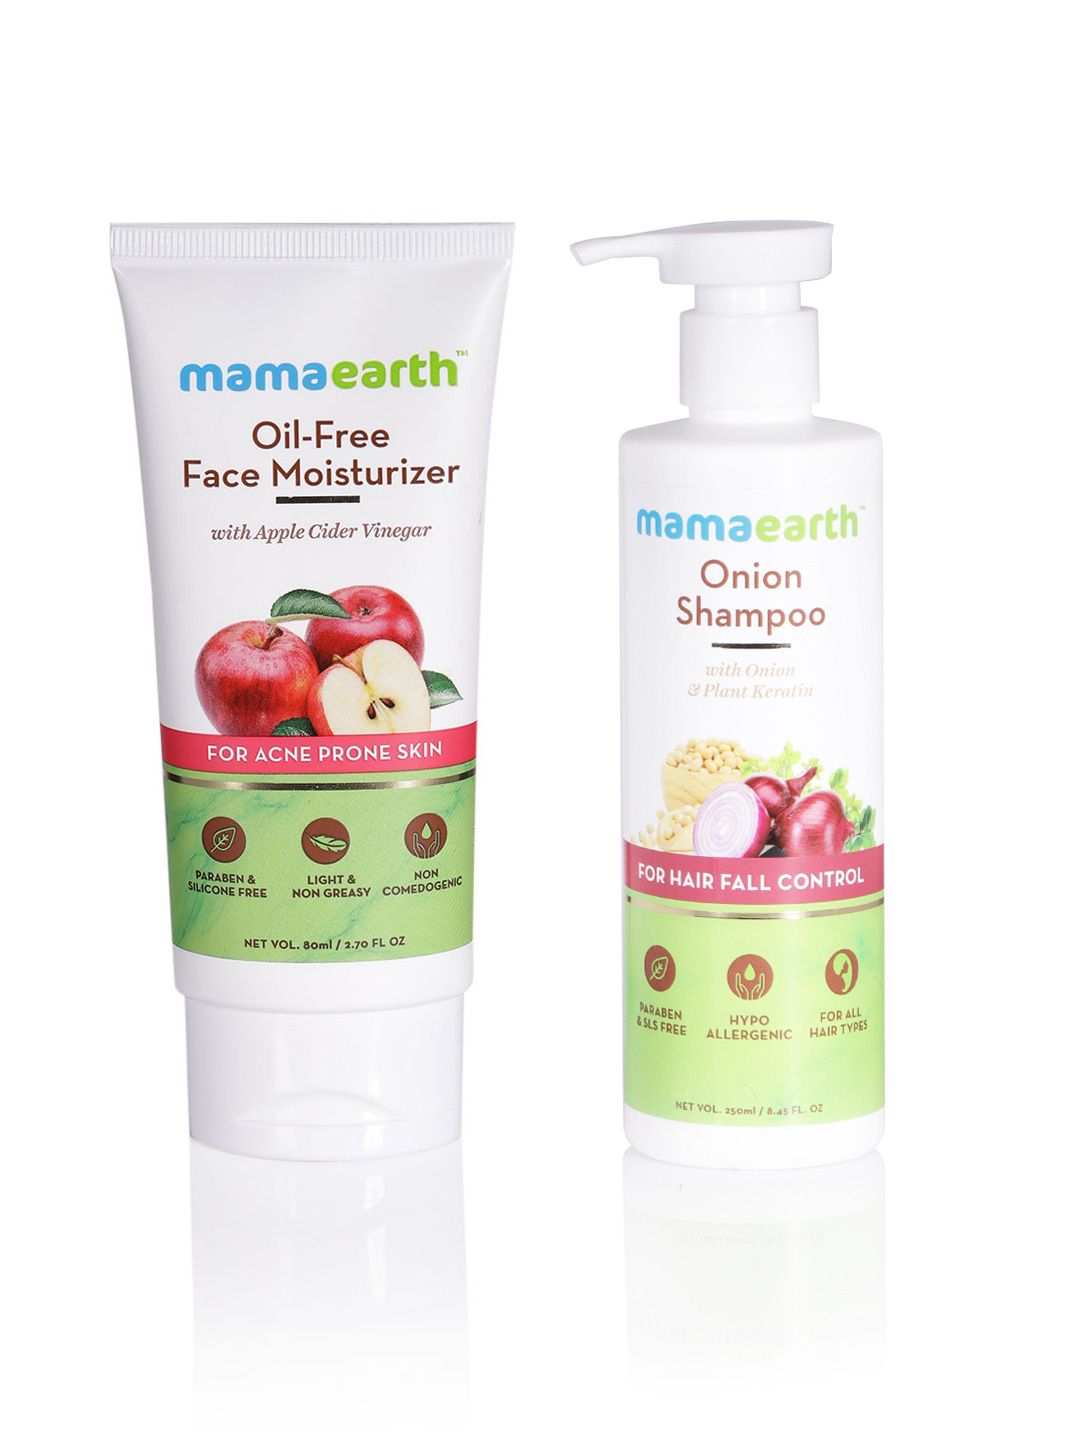 Mamaearth Unisex Sustainable Set of Onion Shampoo & Oil-Free Face Moisturizer Price in India